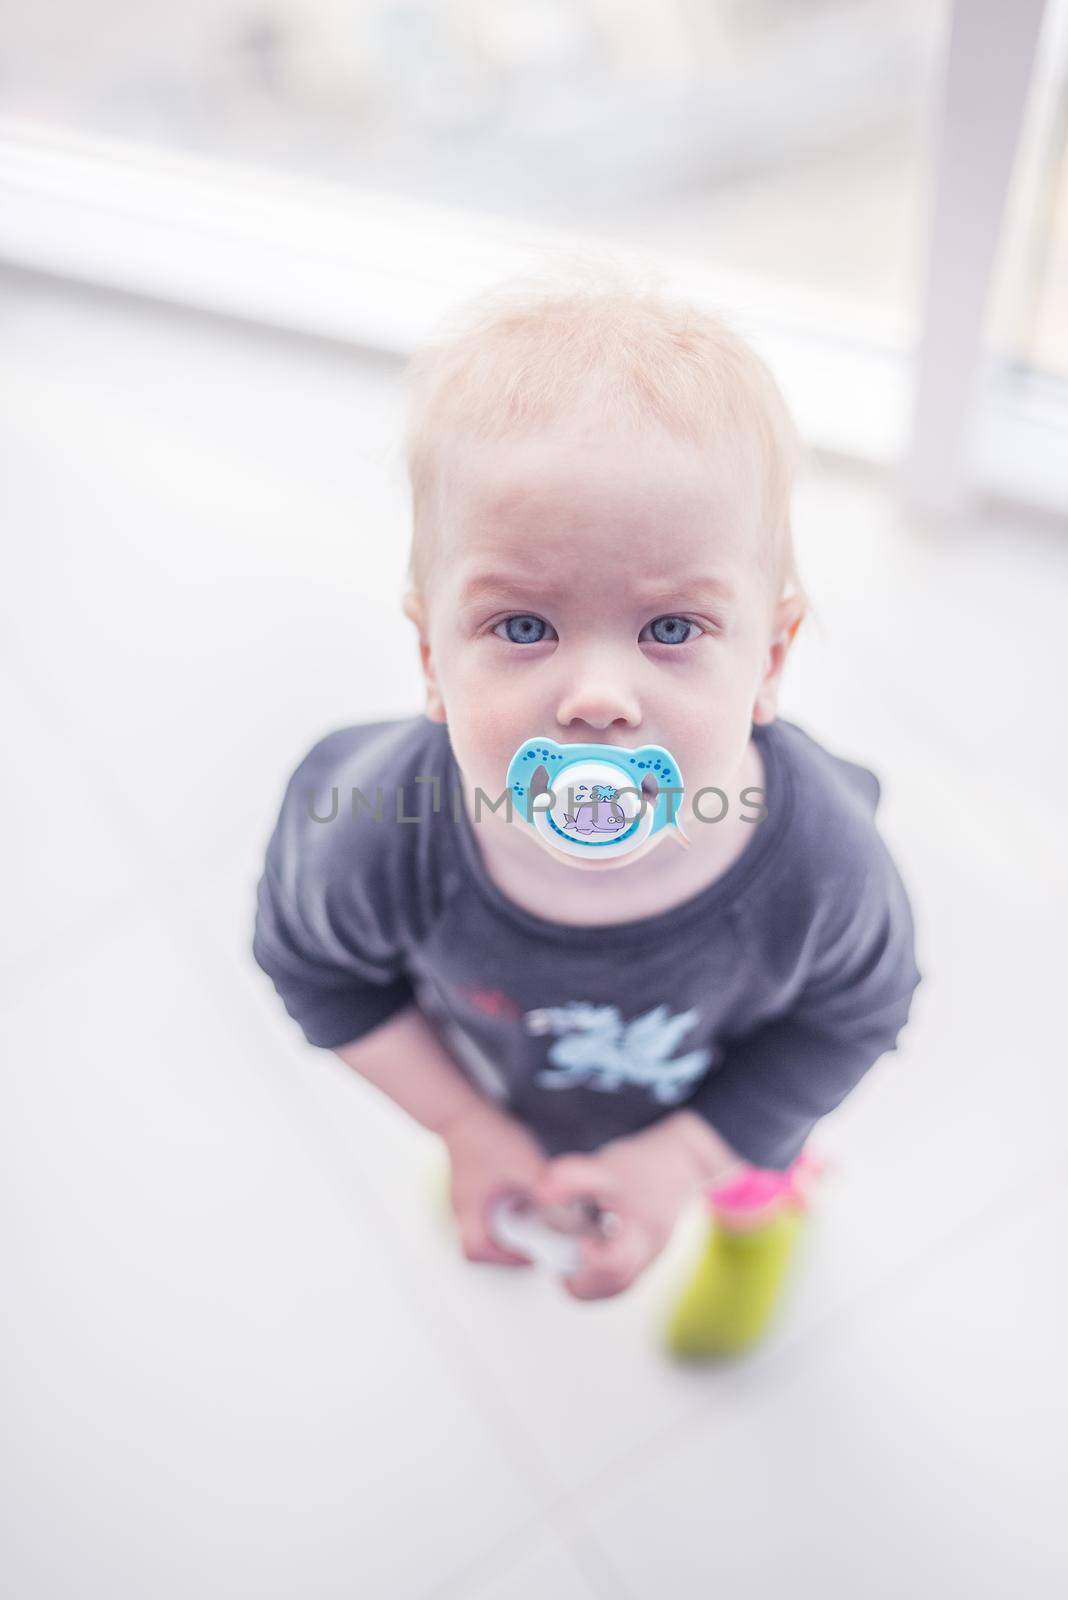 little boy with blue eyes with a pacifier looking at the camera, white background, view from above / cute kids / joy of motherhood